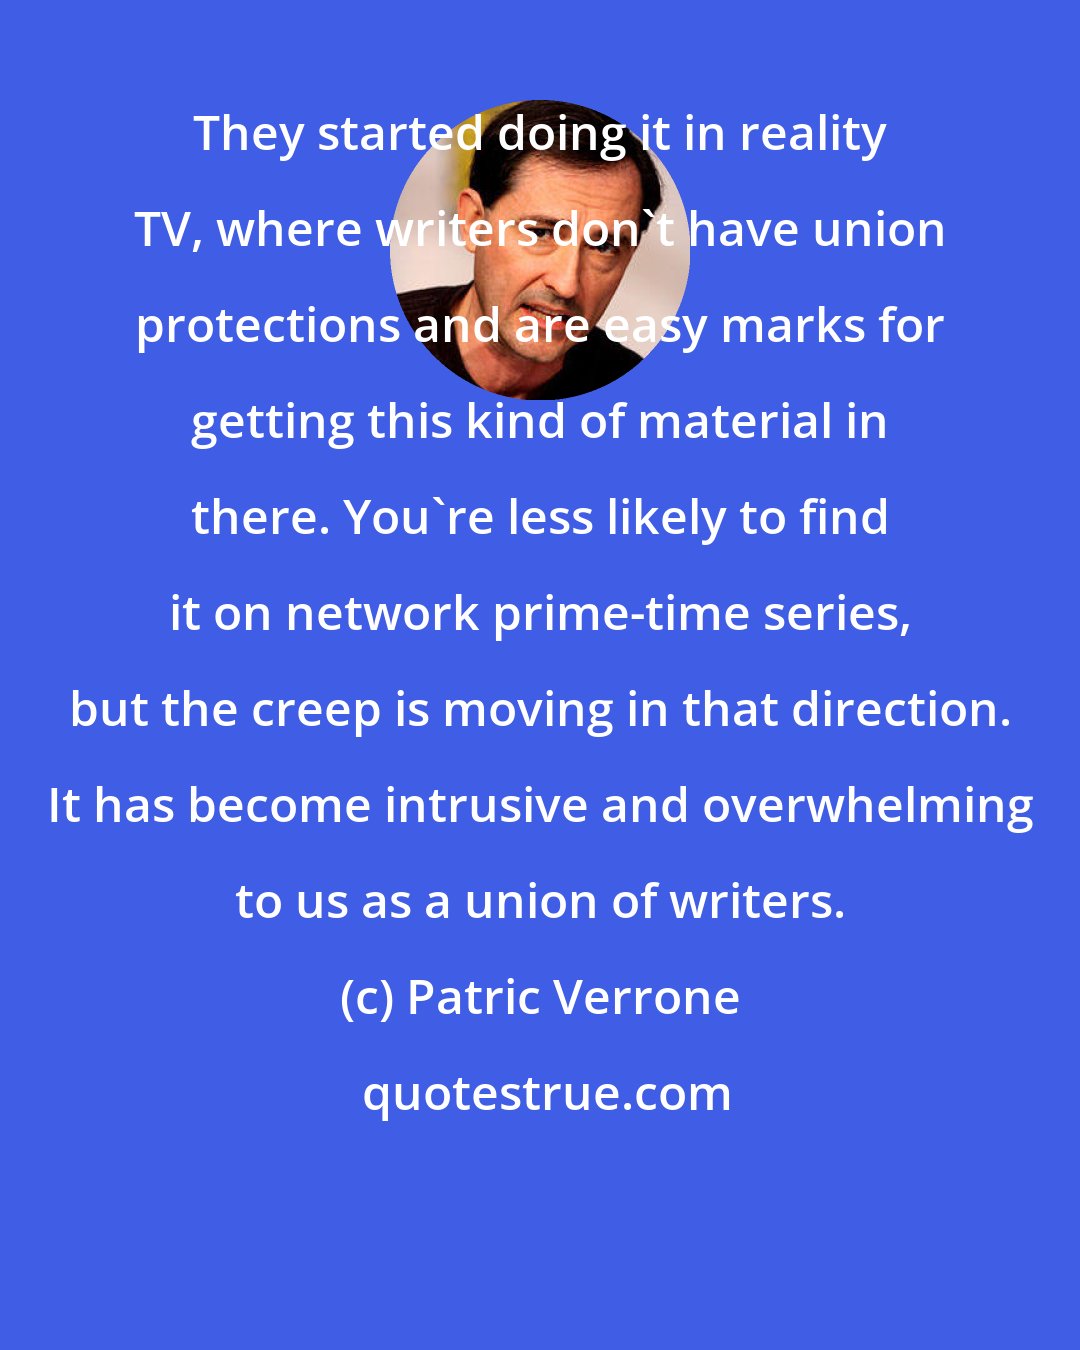 Patric Verrone: They started doing it in reality TV, where writers don't have union protections and are easy marks for getting this kind of material in there. You're less likely to find it on network prime-time series, but the creep is moving in that direction. It has become intrusive and overwhelming to us as a union of writers.